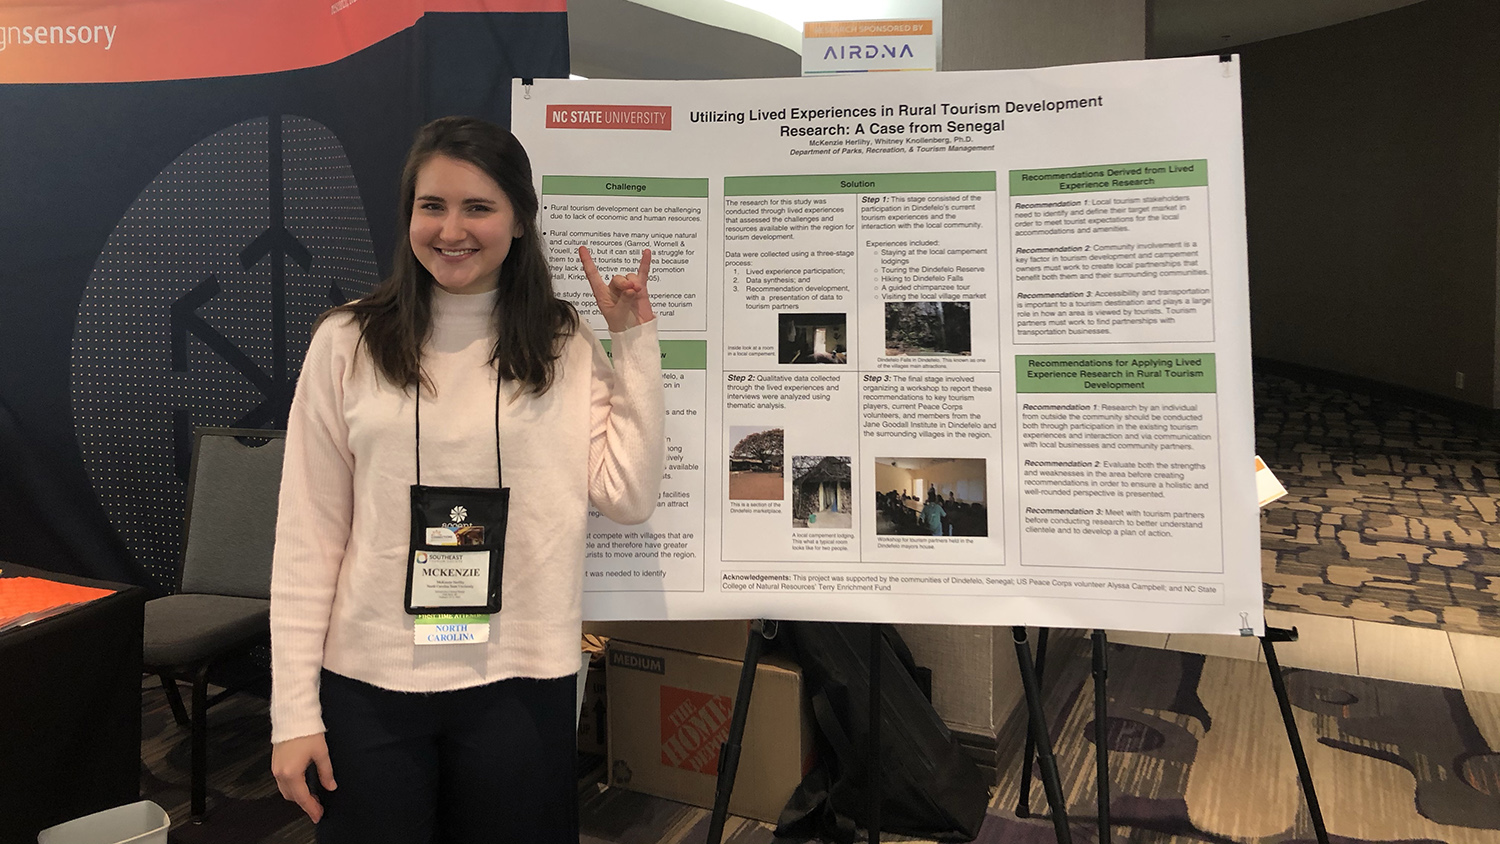 McKenzie Herlihy - Graduation to Vocation: Empowering Communities with Sustainable Tourism - - College of Natural Resources News NC State University